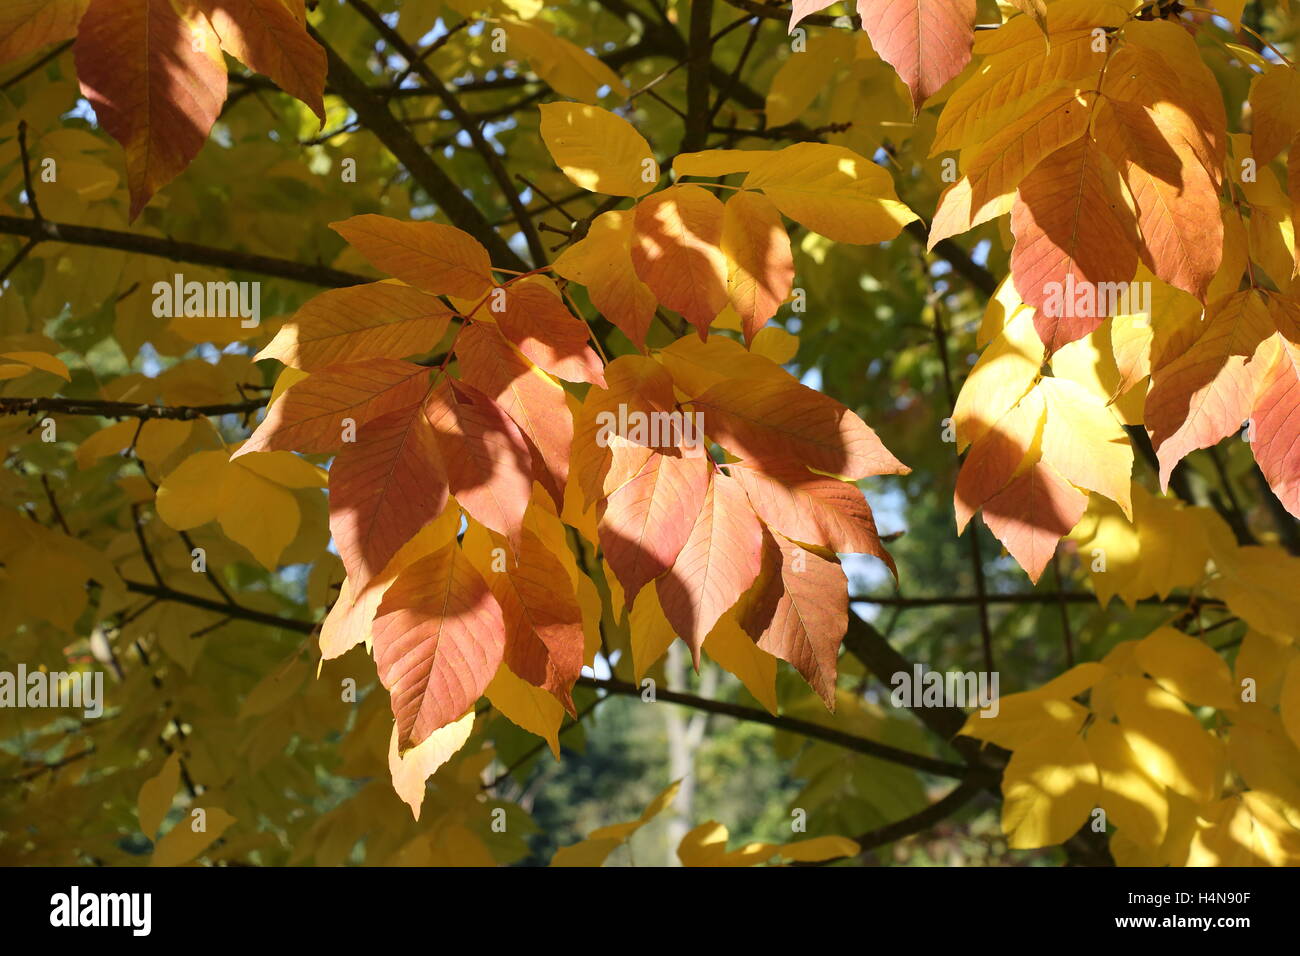 Leaves on tree showing autumn colours in the fall Stock Photo